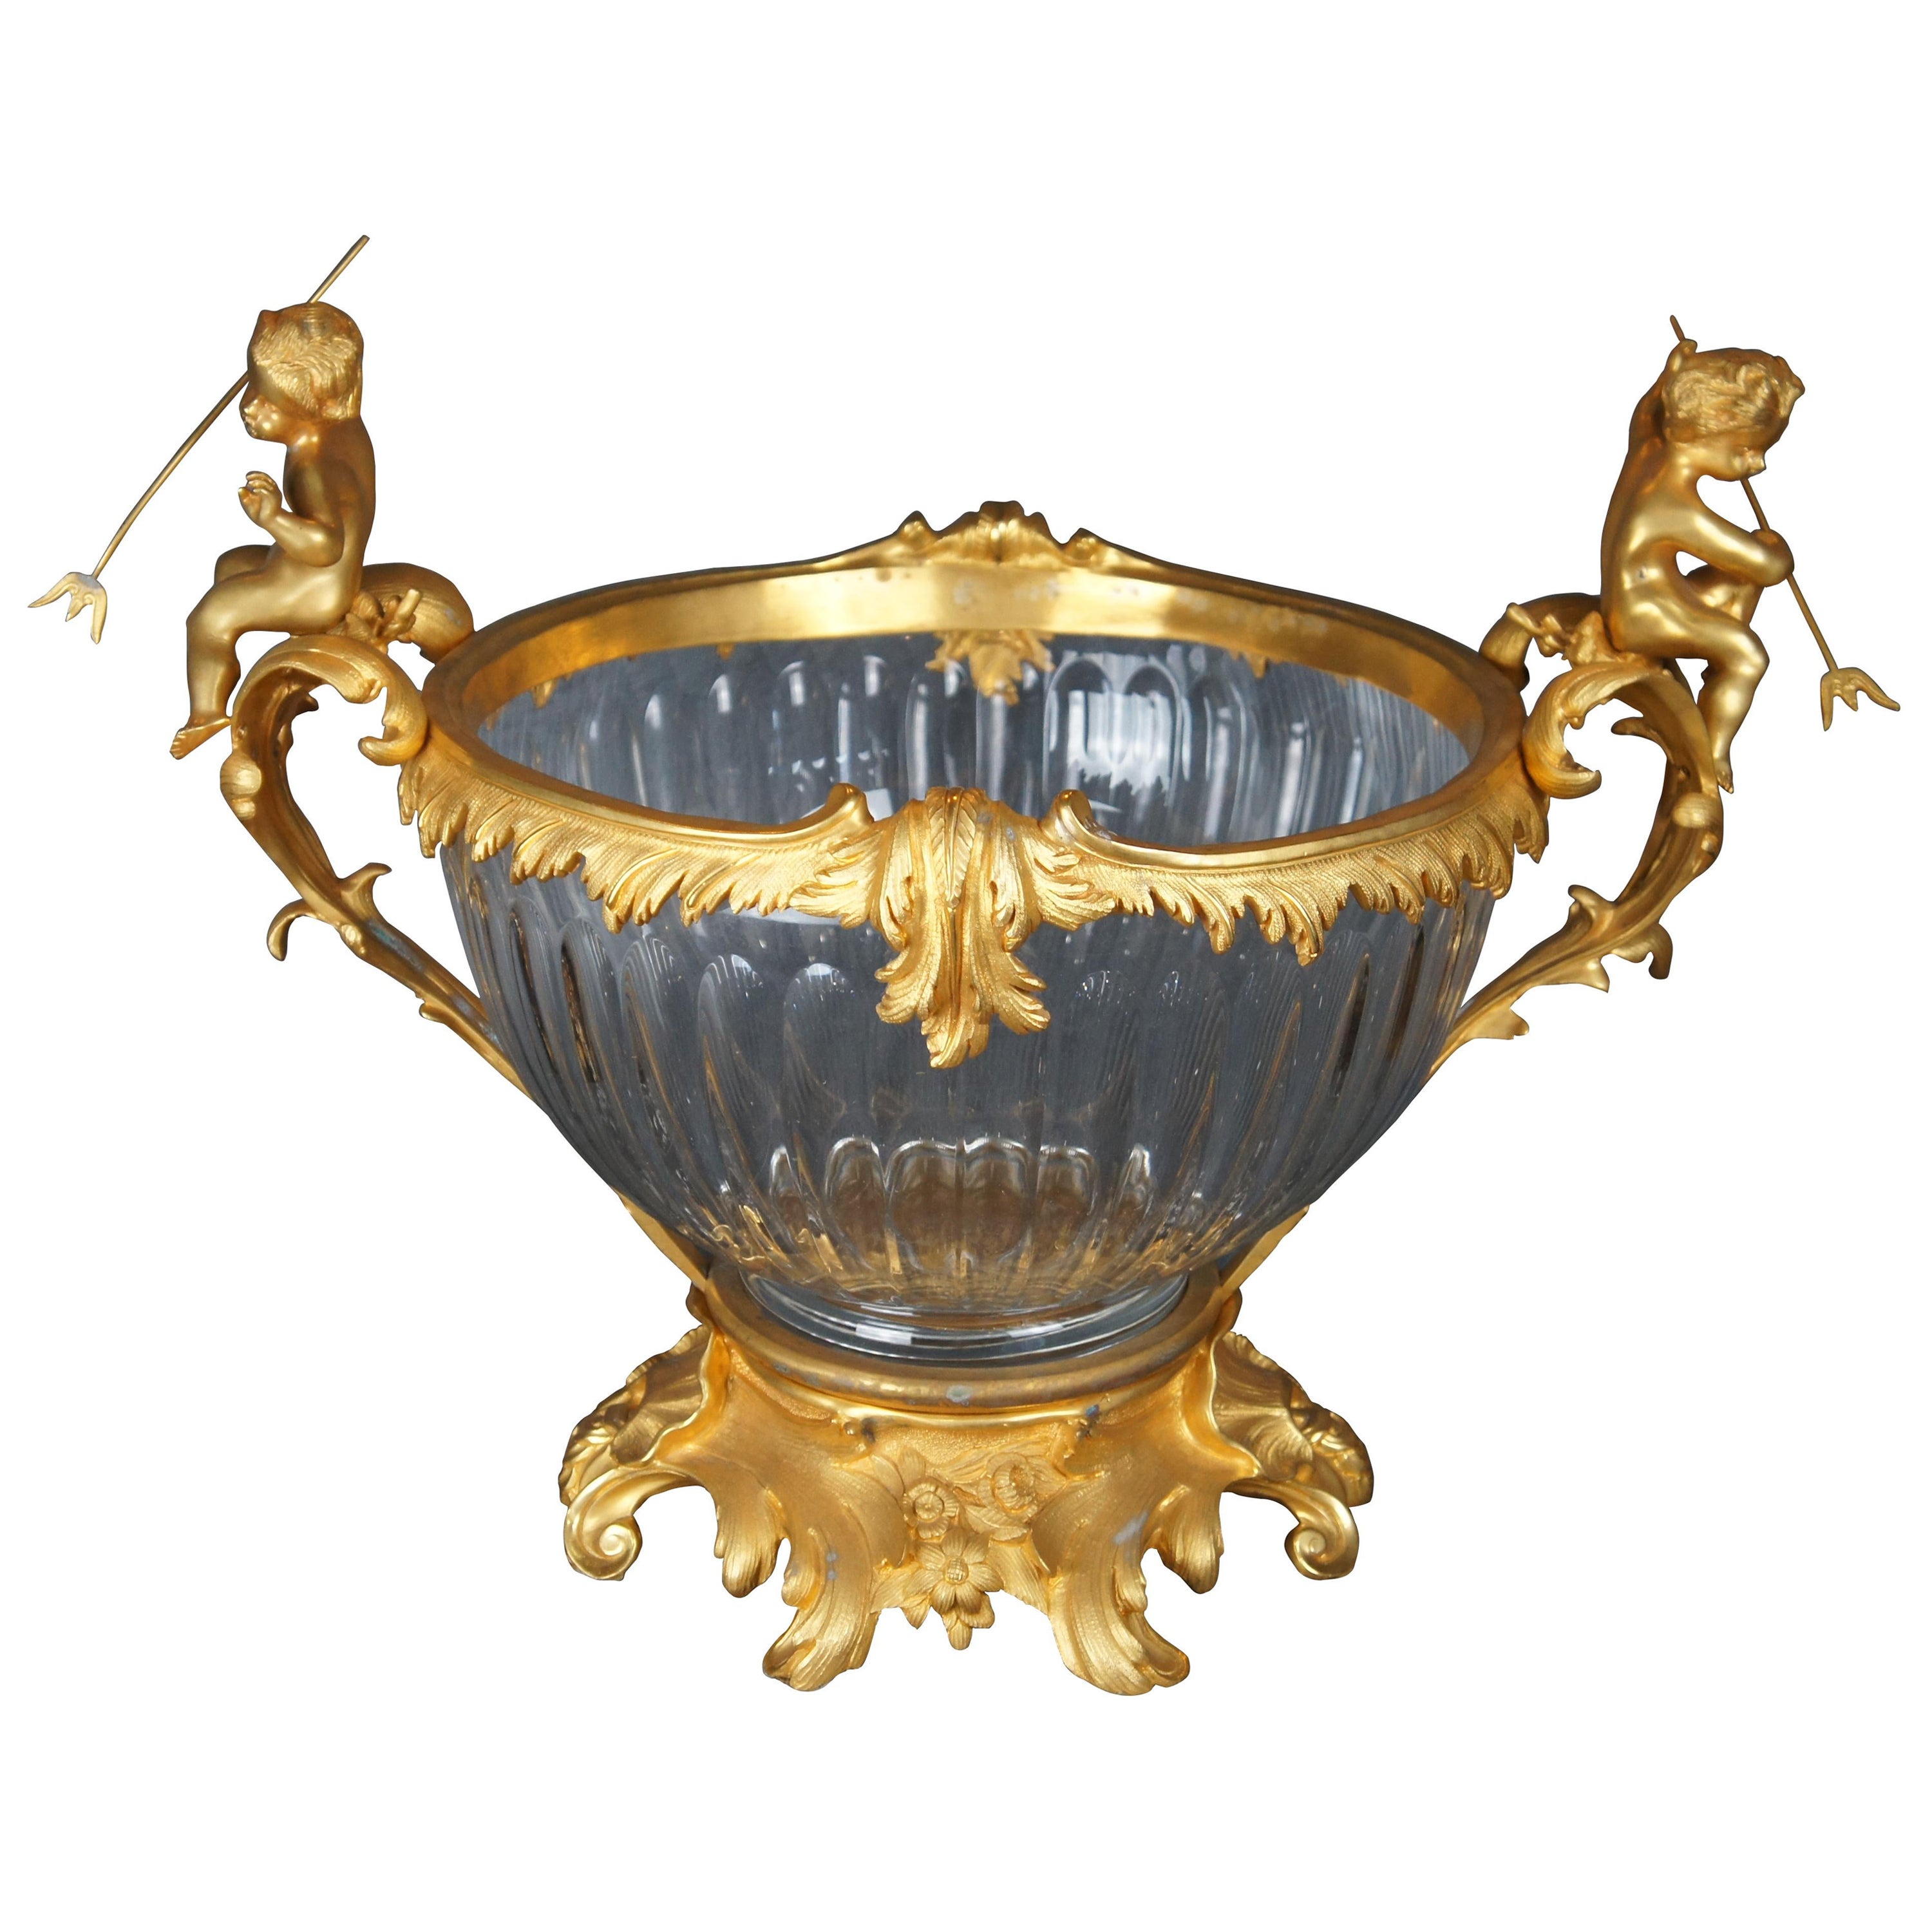 What is a Champagne Bowl?